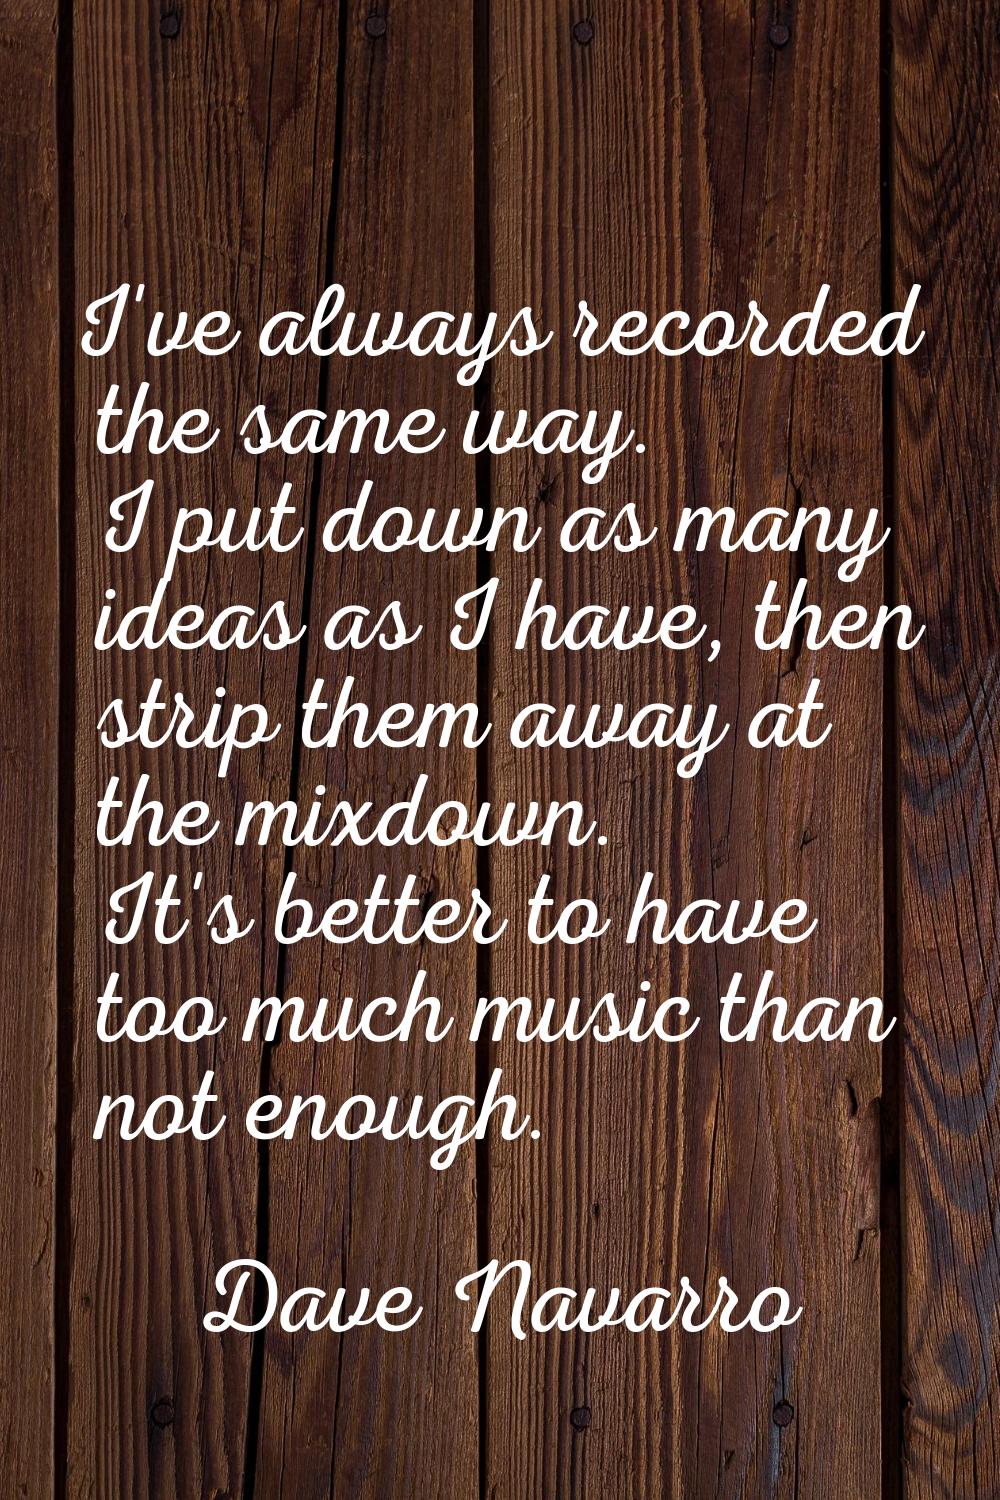 I've always recorded the same way. I put down as many ideas as I have, then strip them away at the 